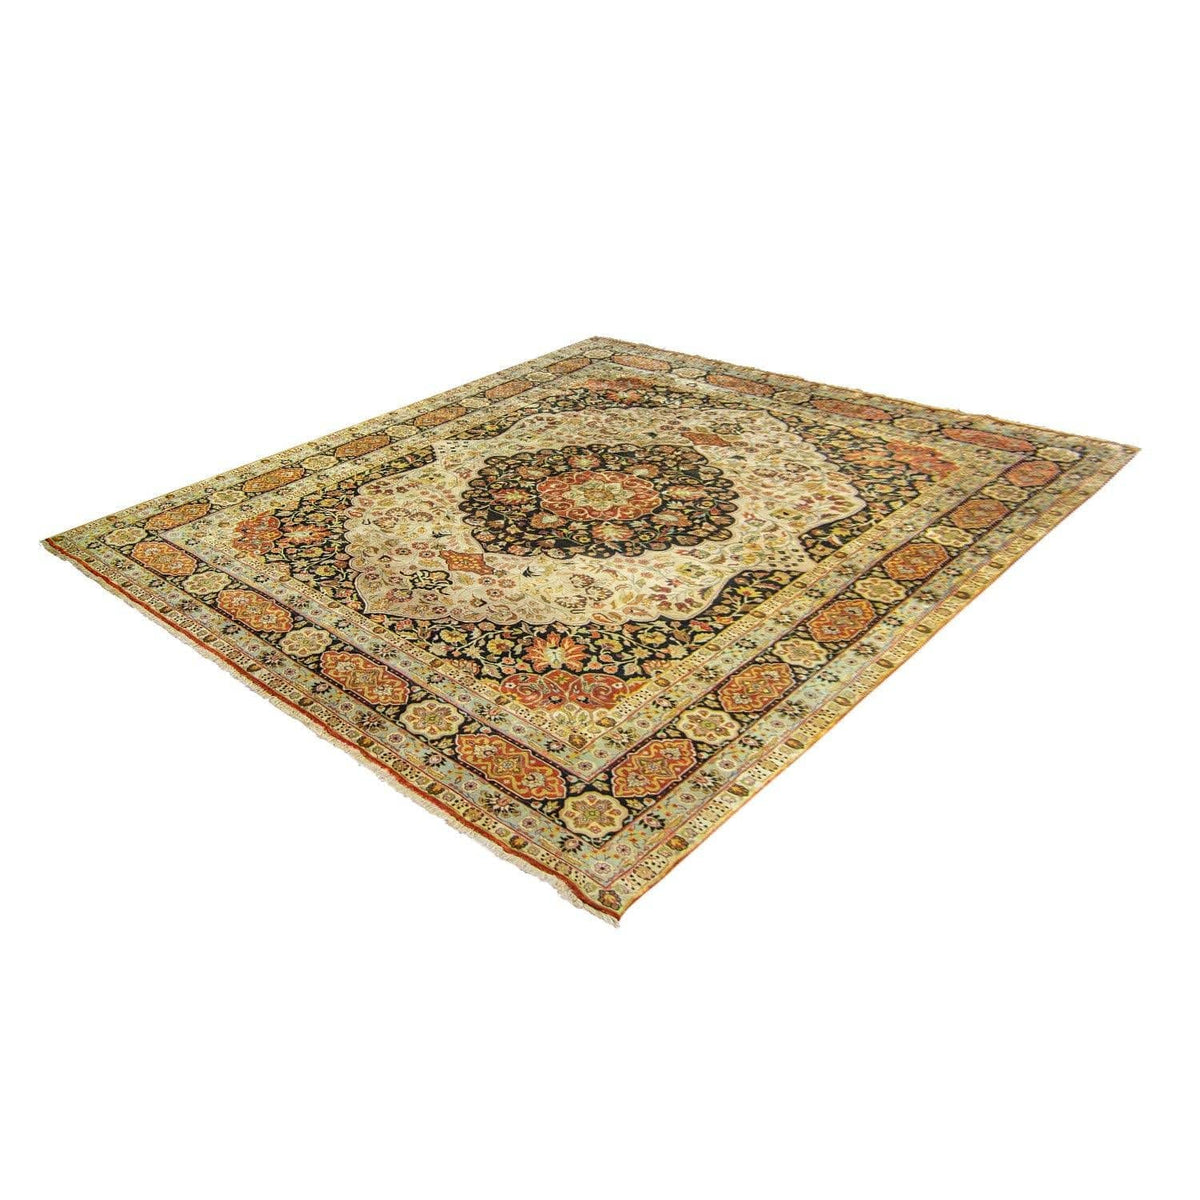 Fine Hand-knotted Wool Traditional Saruk Rug 271cm x 362cm